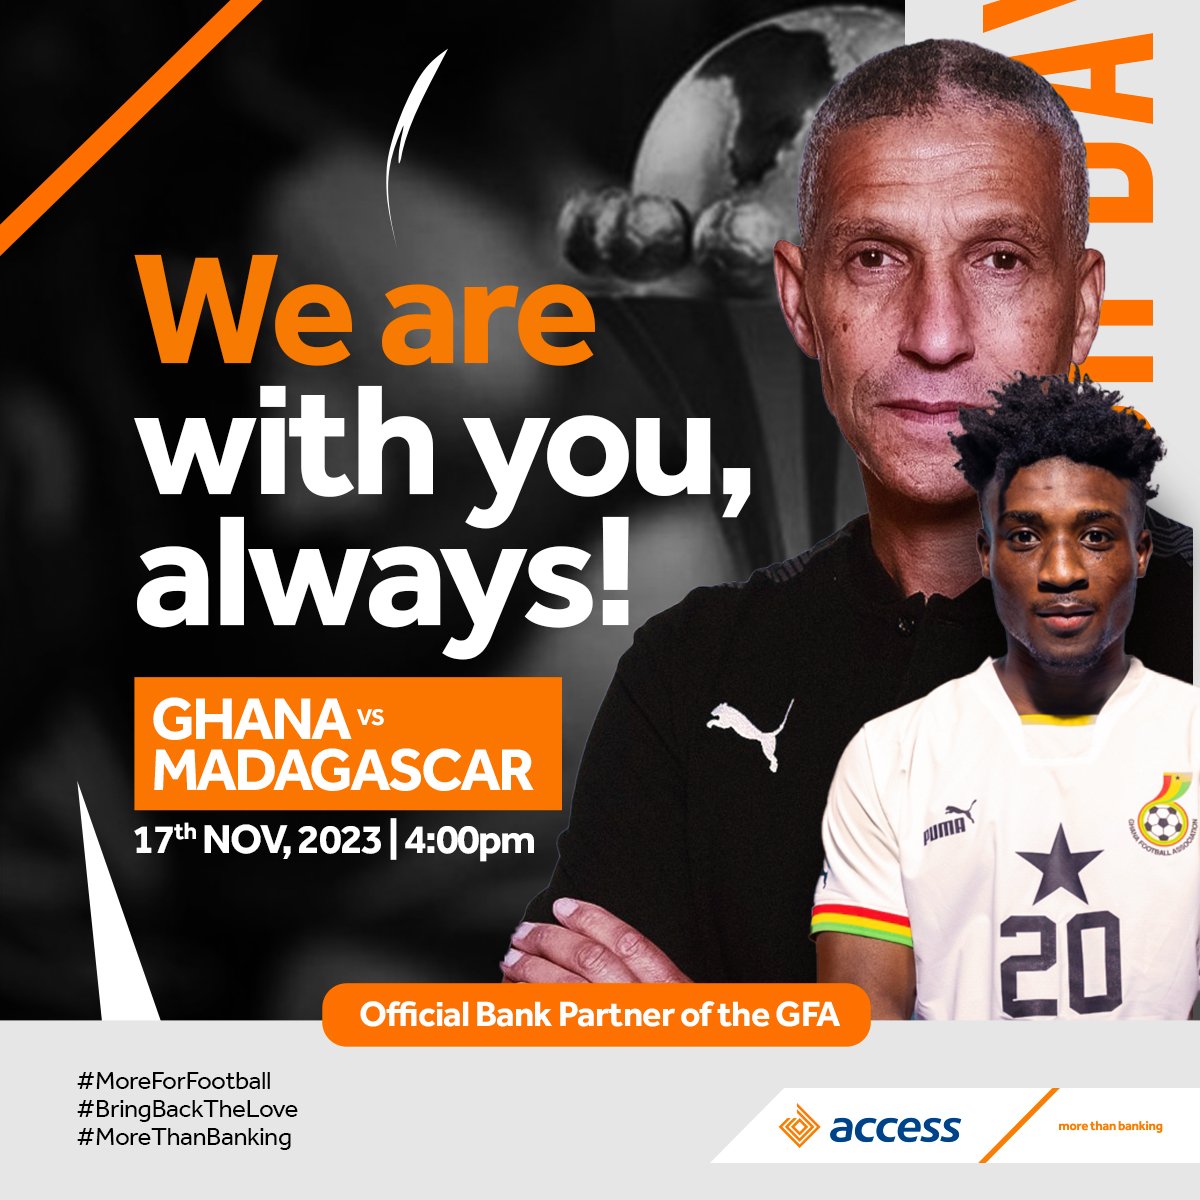 We go again today - this time against Madagascar.

Let’s stand as one in full support of our Black Stars.

#ForTheLoveOfFootball #BringBackTheLove #BlackStars #MoreThanBanking